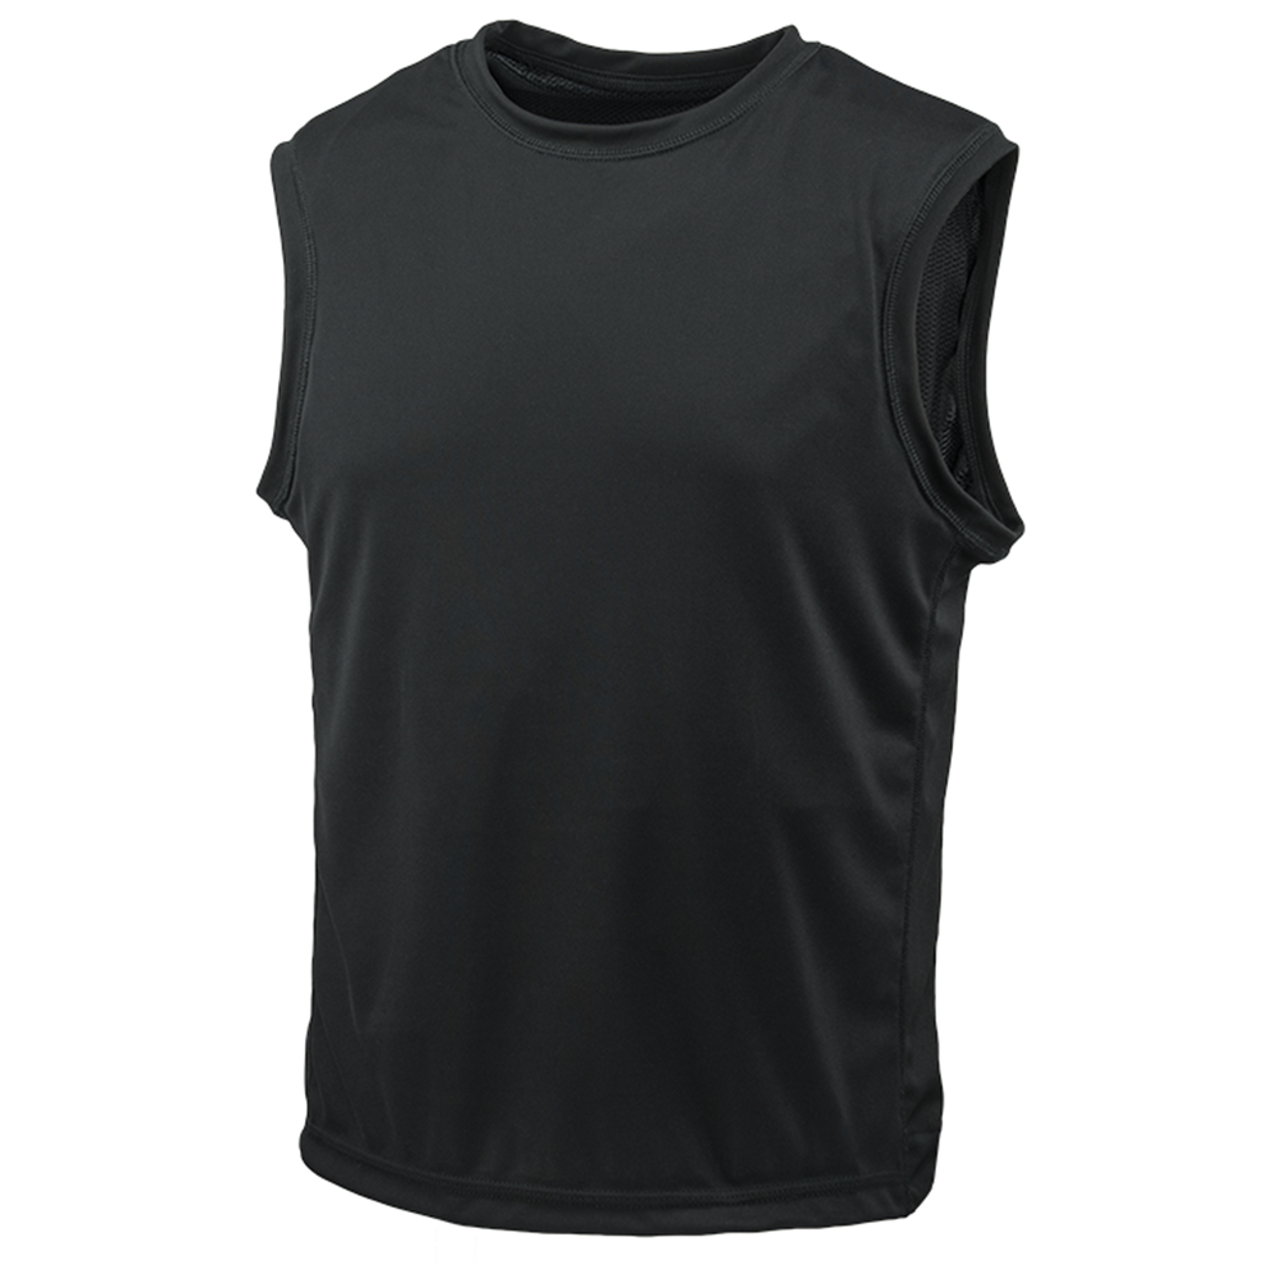 Armor Express T-Shirt Concealable Ballistic Body Armor Carrier, a running shirt style that provides maximum mobility and comfort. Choose Carrier only or Carrier and Panels (Soft Armor), NIJ Certified - Level 2, or Level 3A Threat Levels